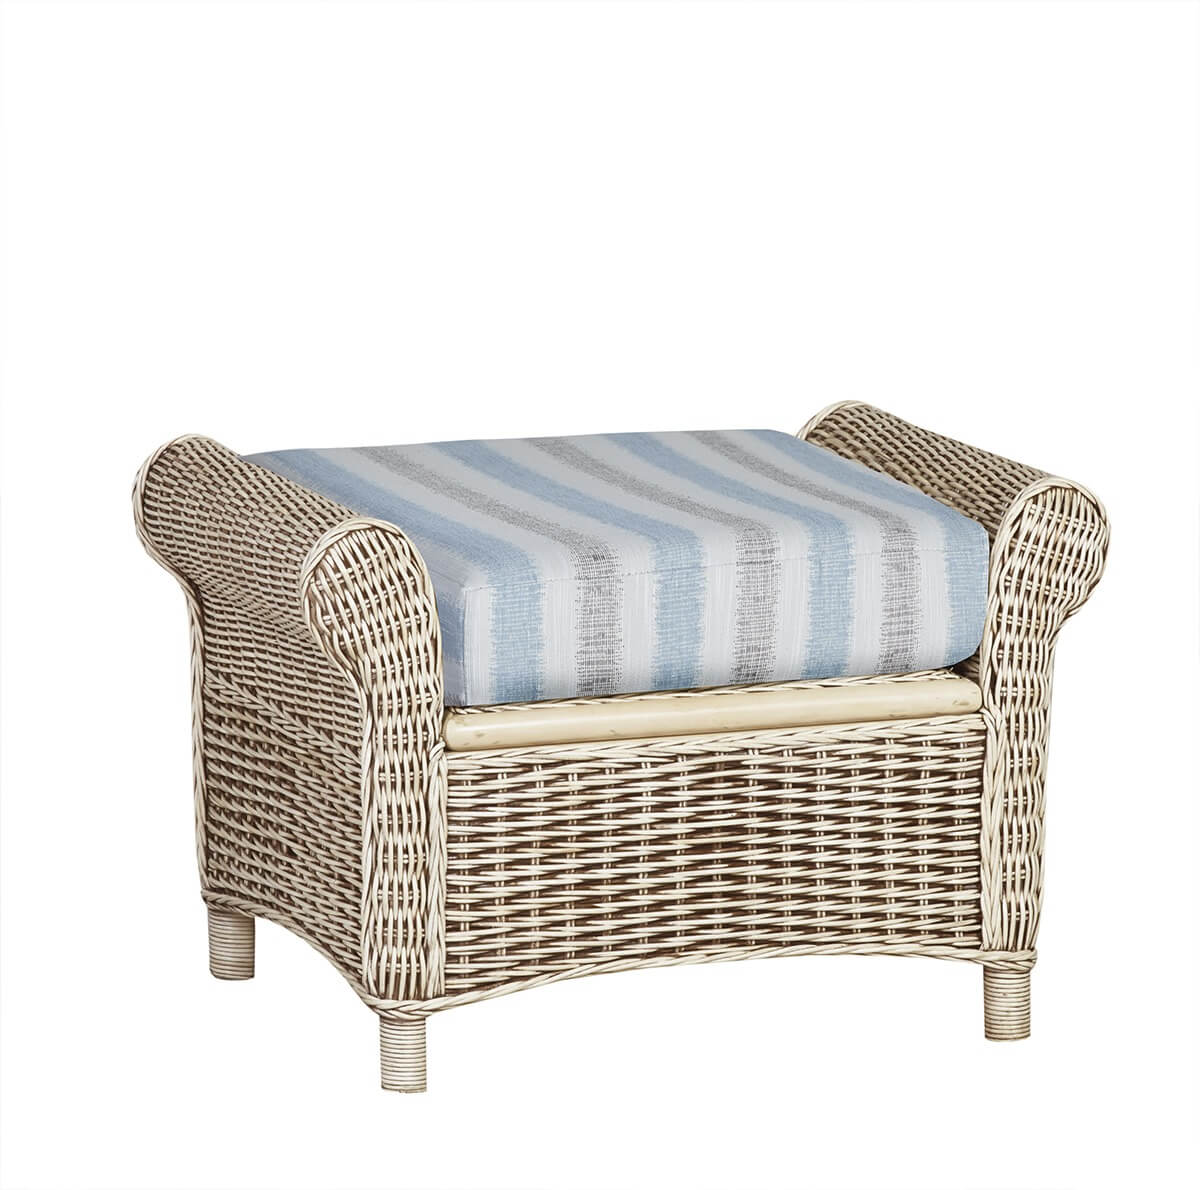 Showing image for Sarrola footstool with storage